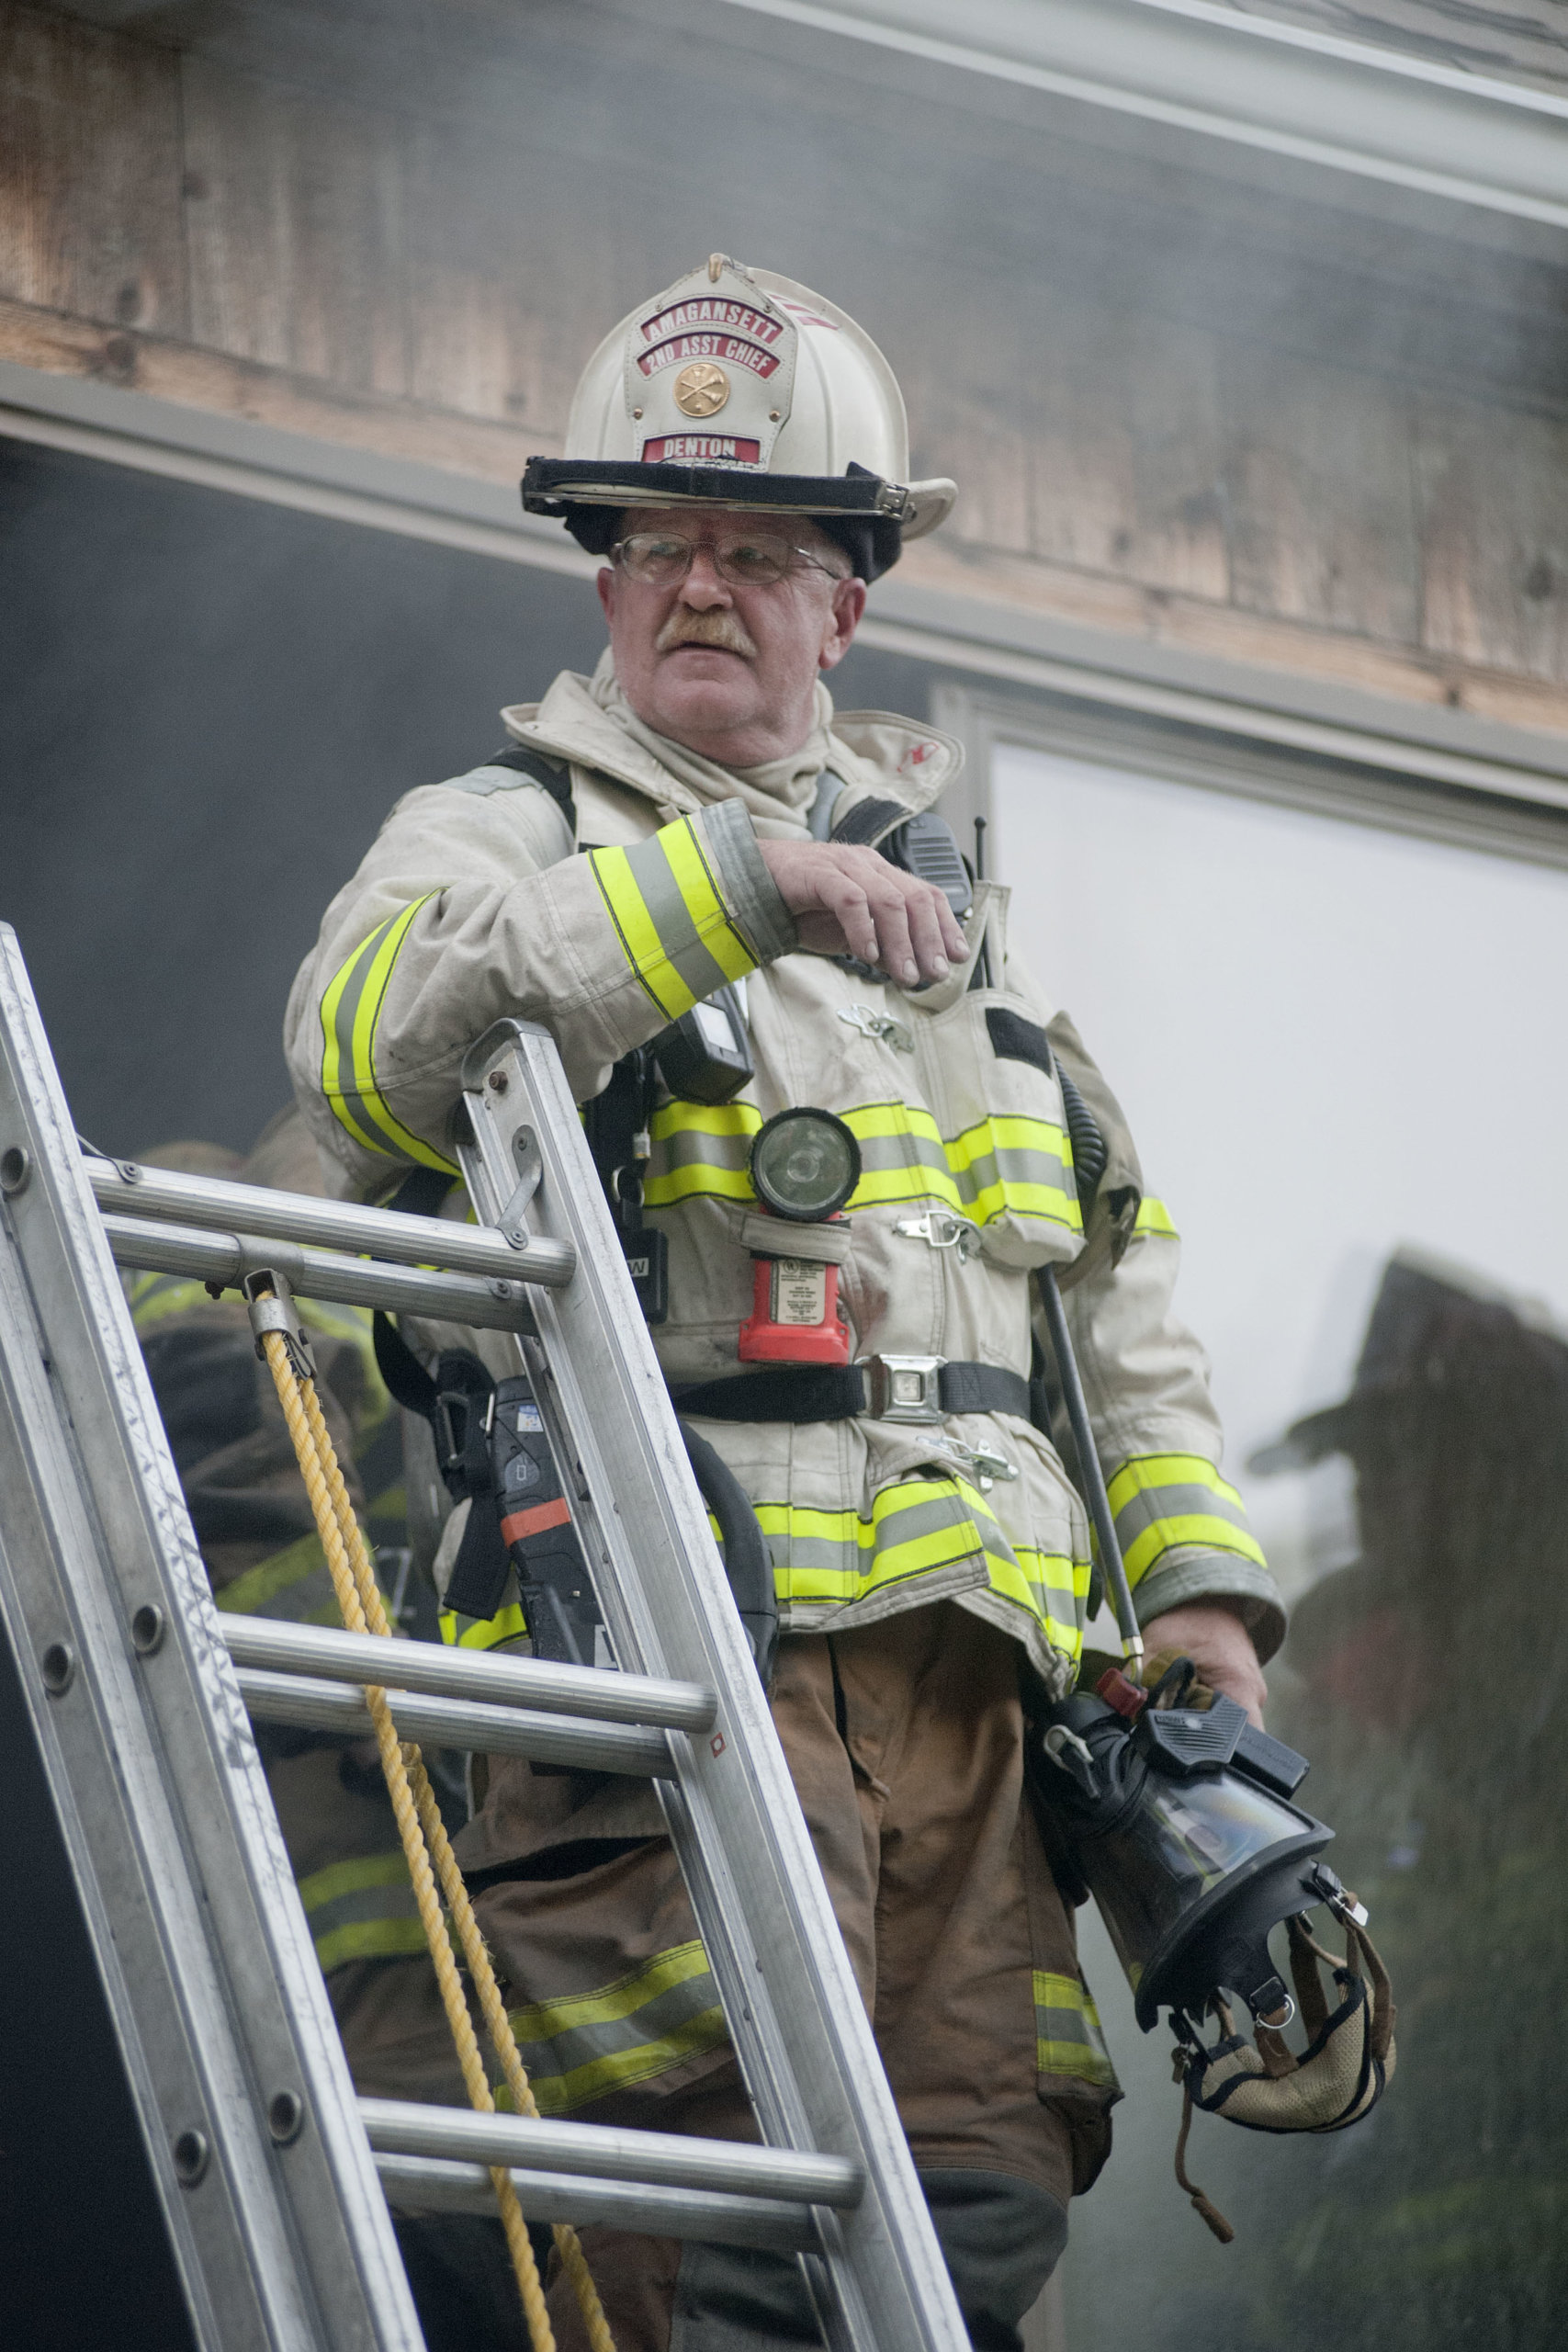 Dwayne Denton at live burn drill with Amagansett Fire Department in 2011